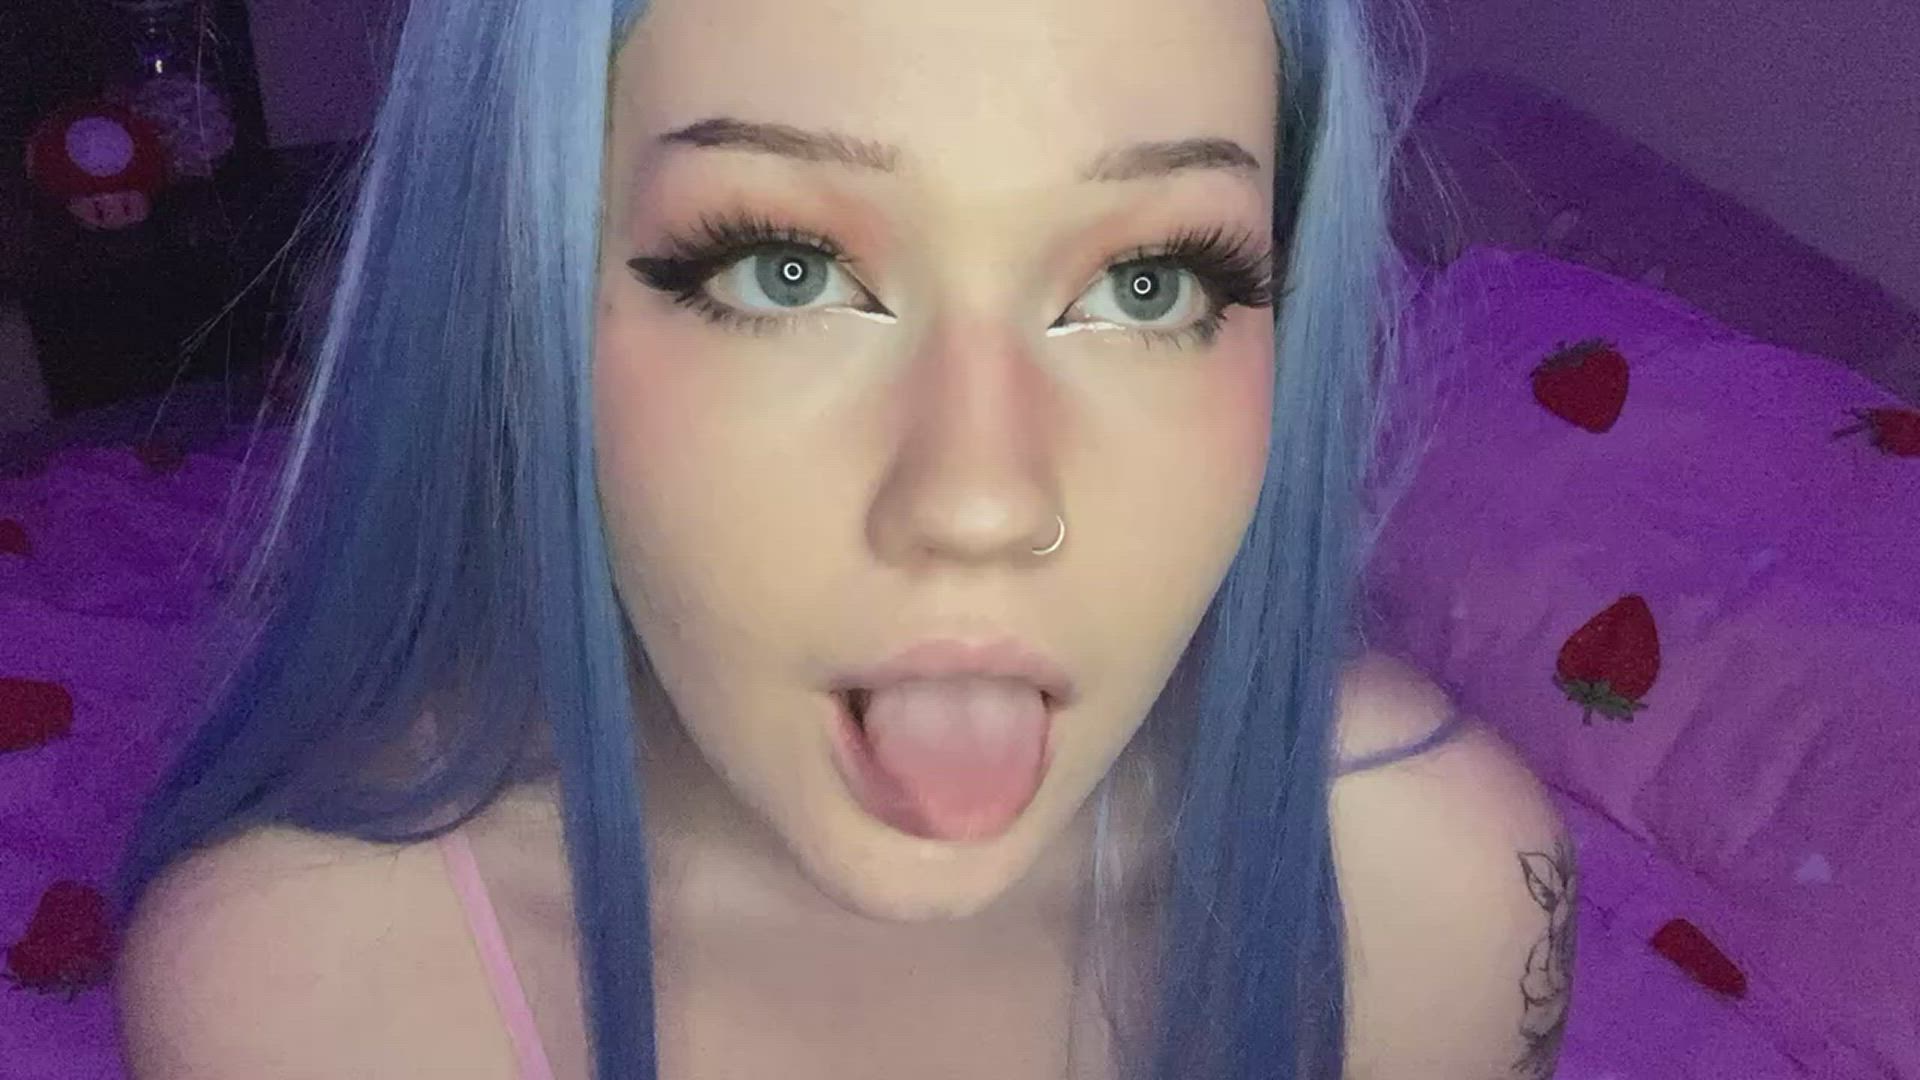 Ahegao porn video with onlyfans model angeldaiquiri <strong>@angeldaiquiri</strong>